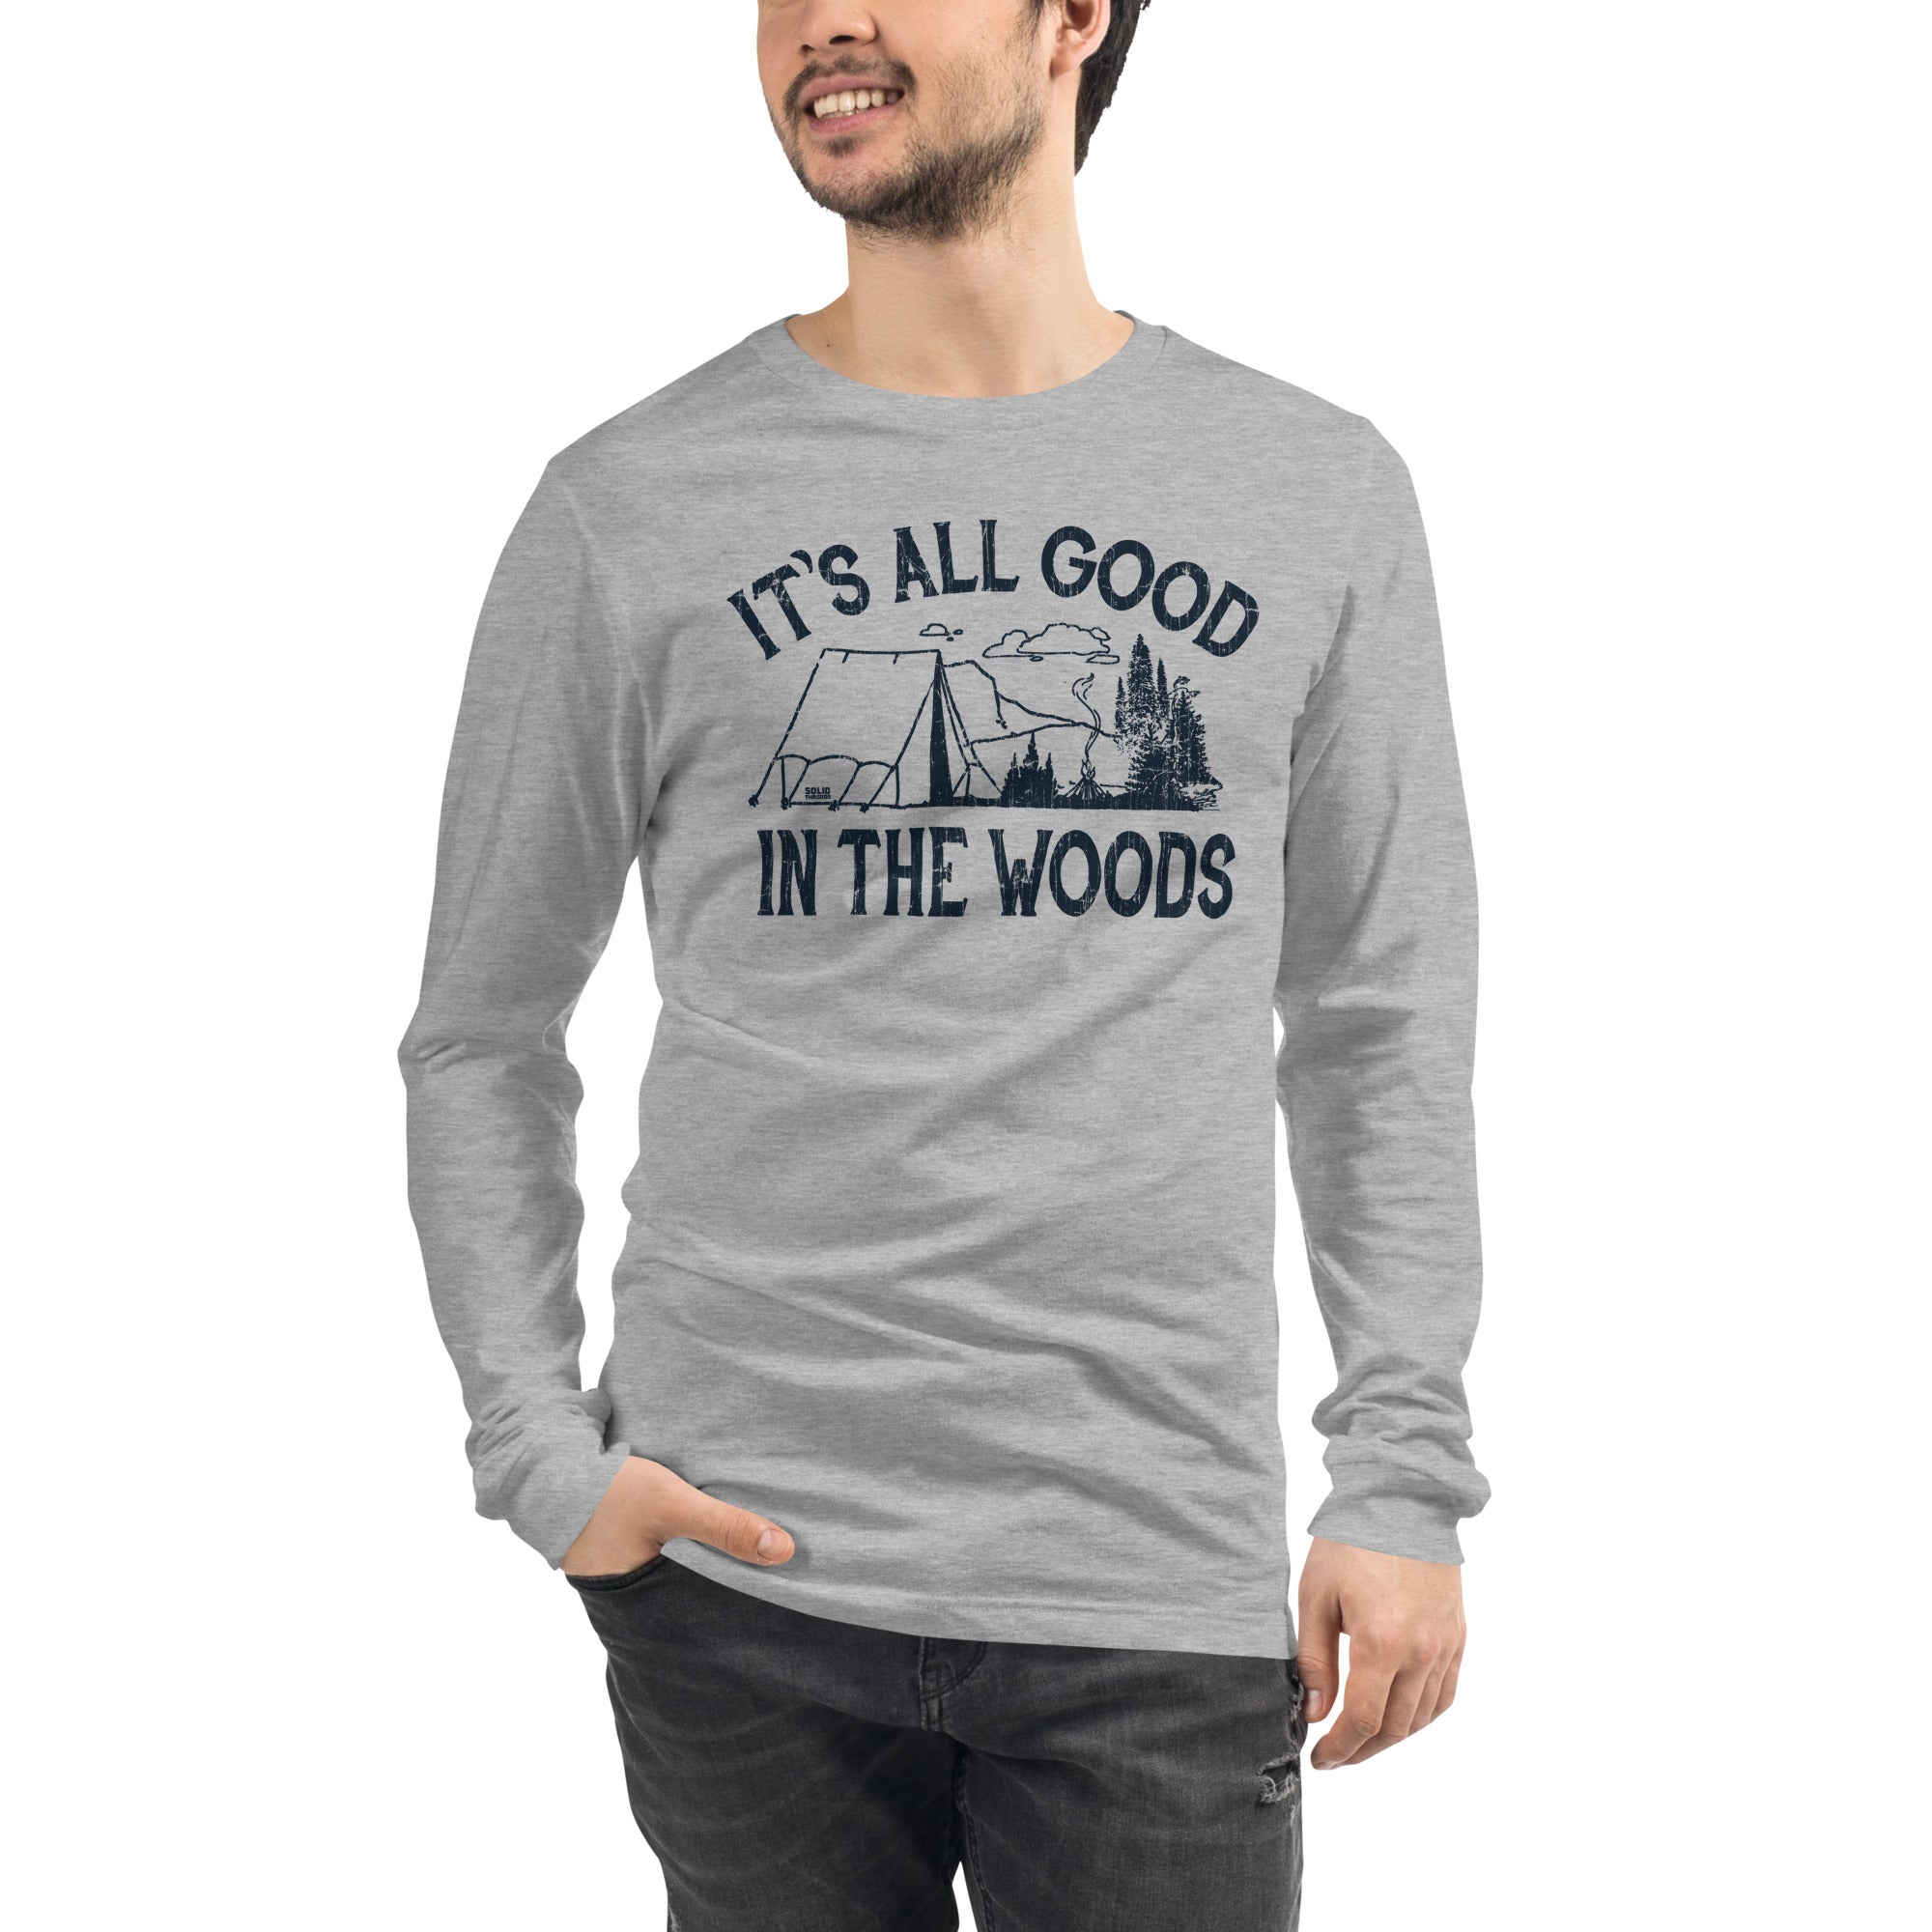 All Good In The Woods Funny Hiking Long Sleeve Tee | Retro Nature T shirt | SOLID THREADS